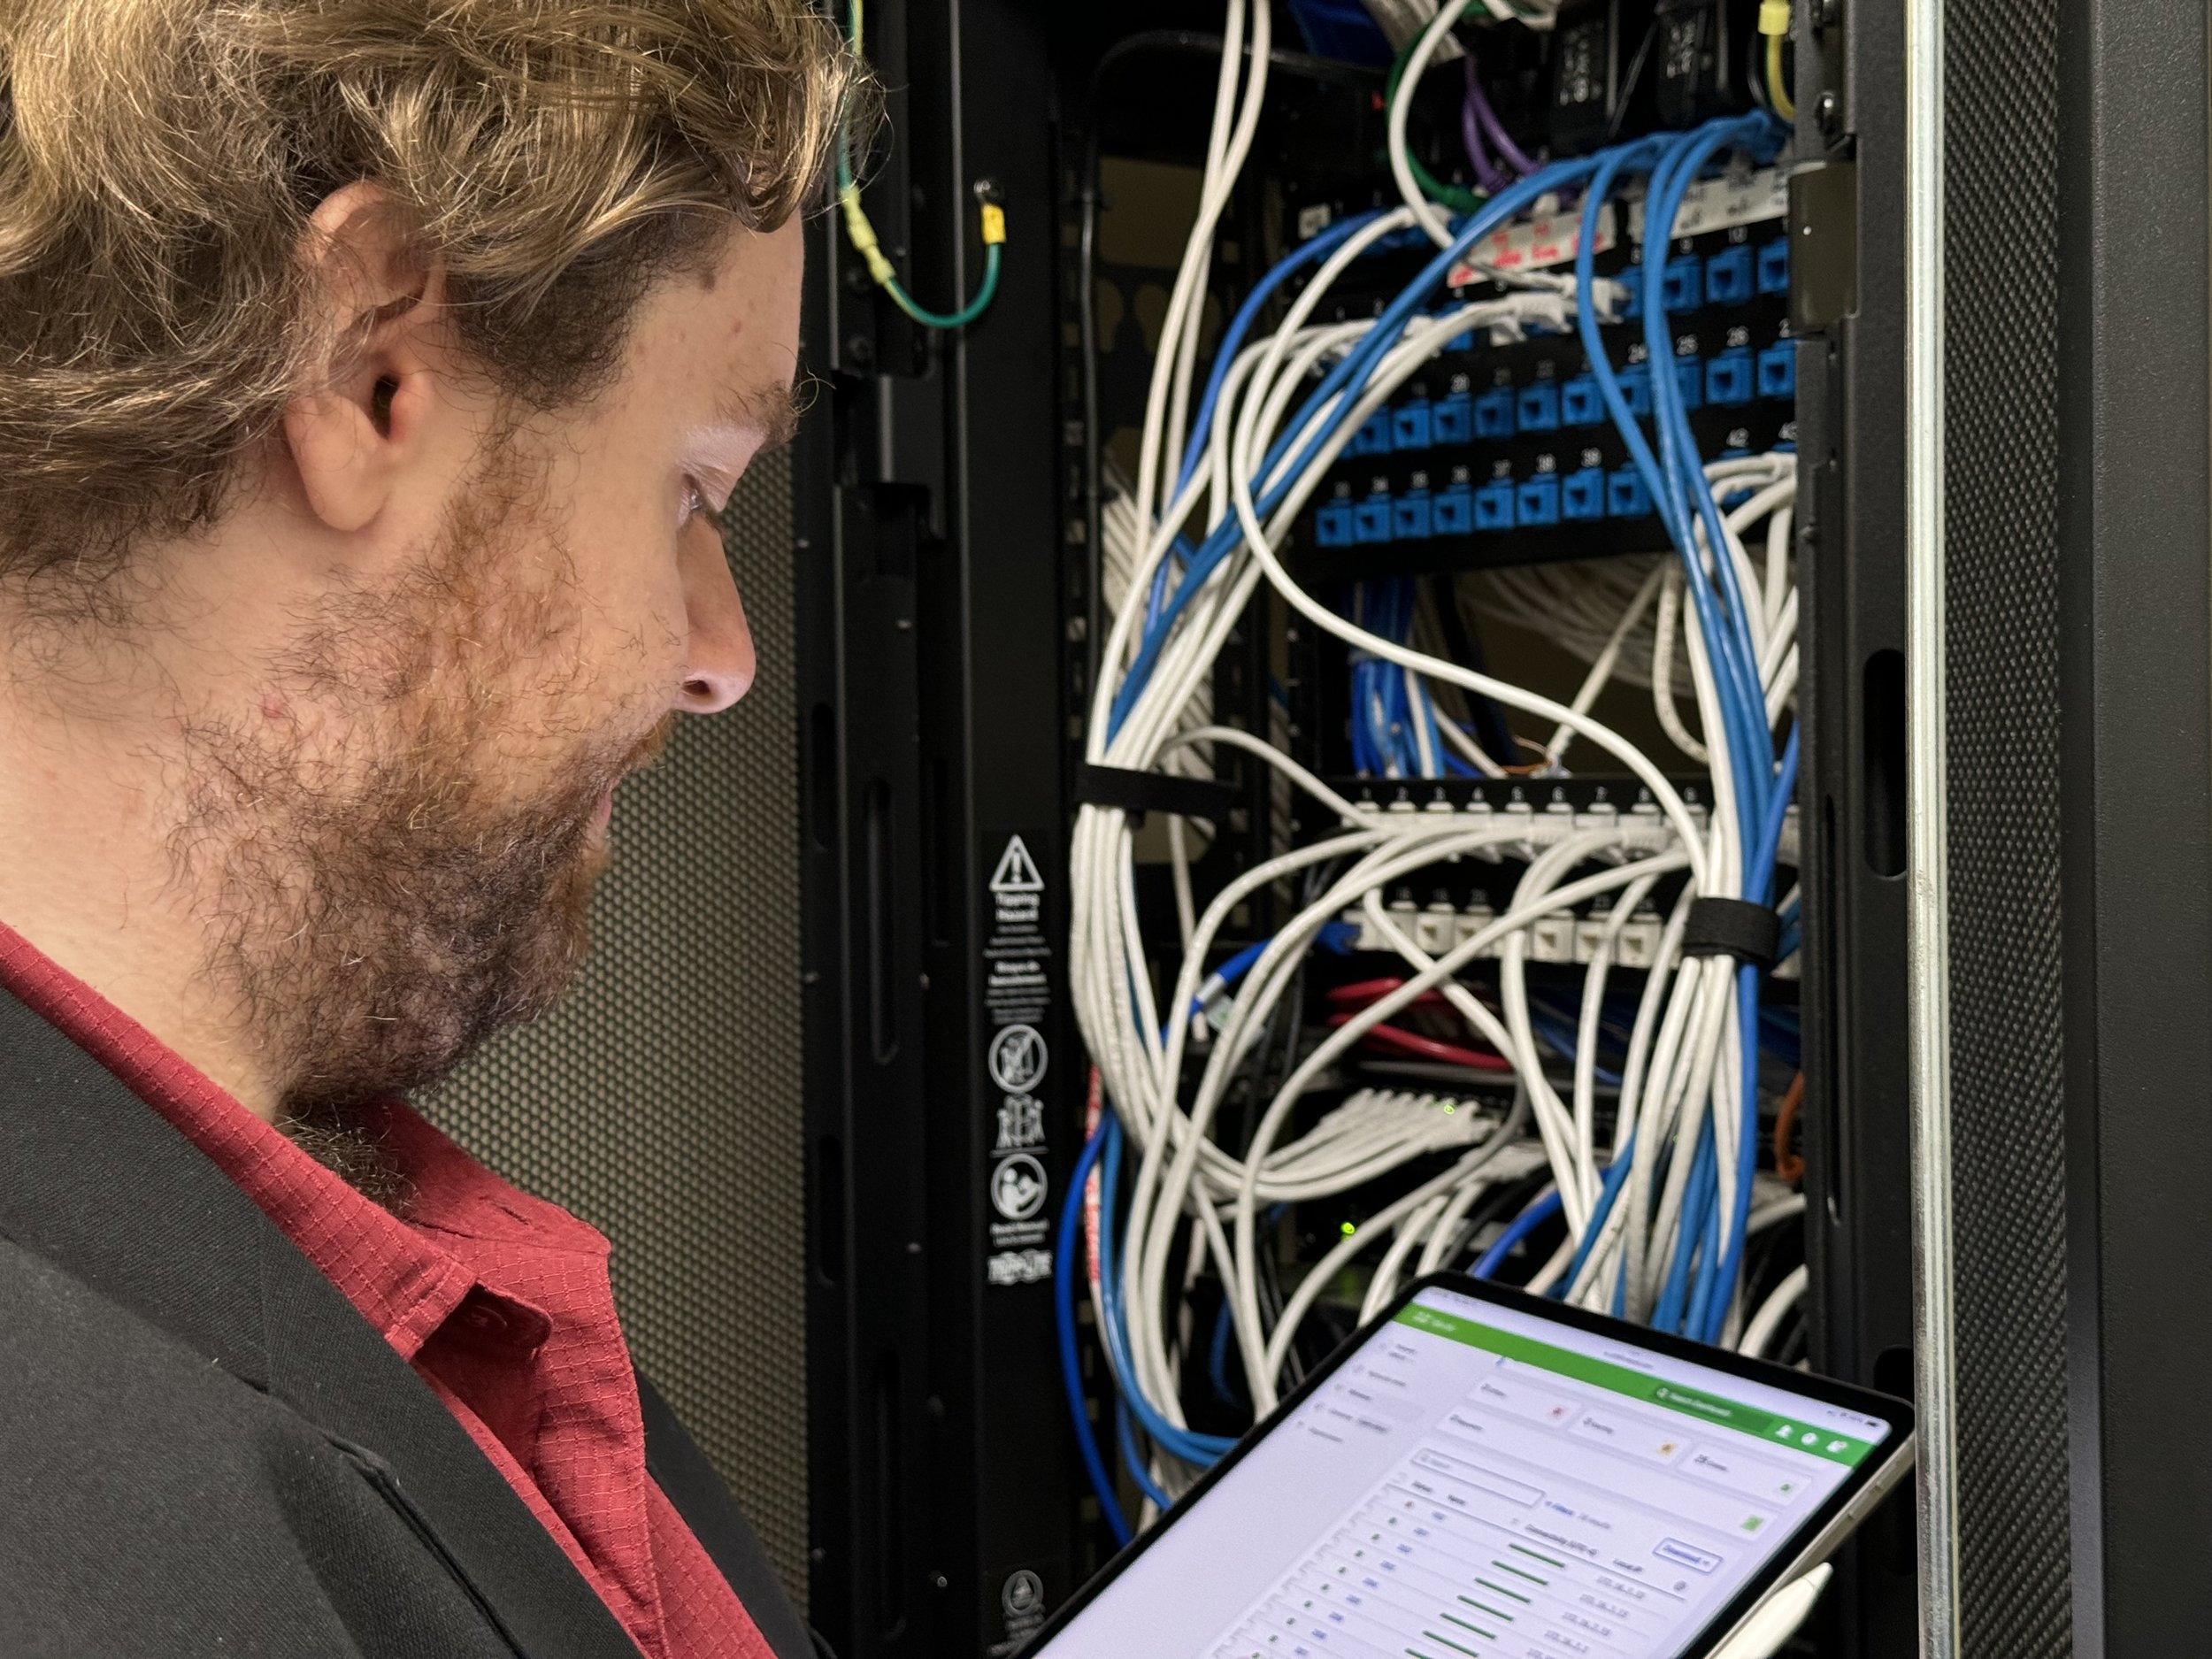  Alex monitors network performance from an iPad Pro while standing in a server closet. 